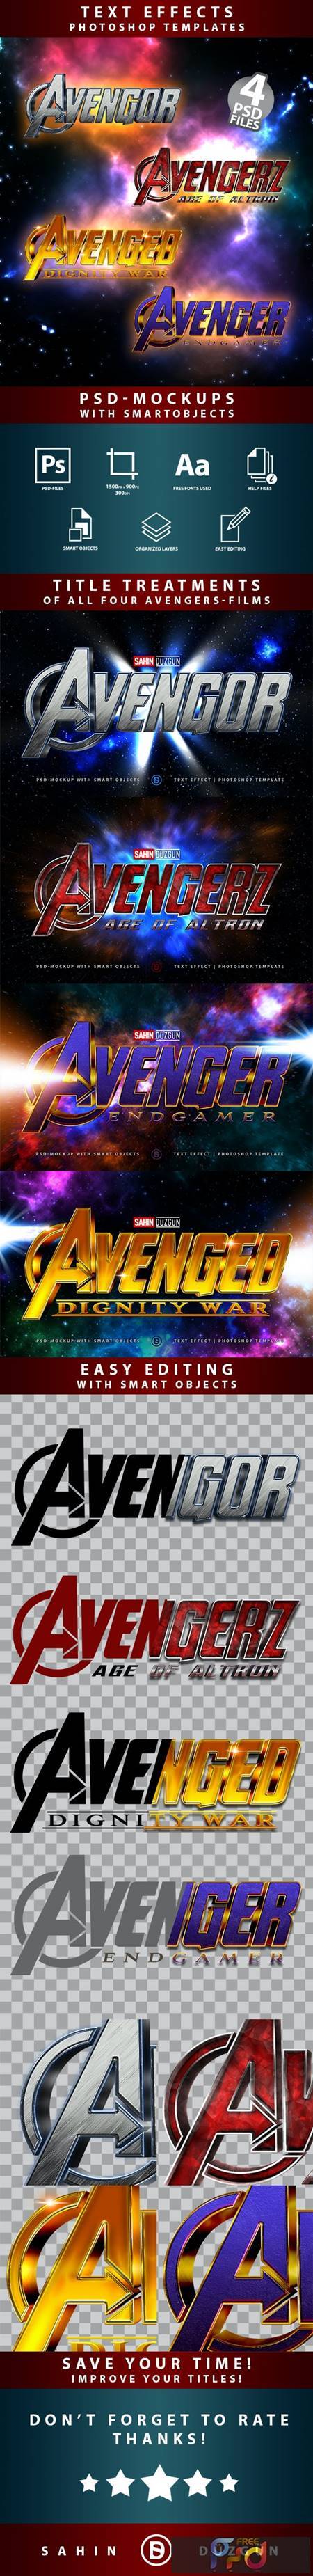 AVENGERS Text   Effects Mockups Template   Package